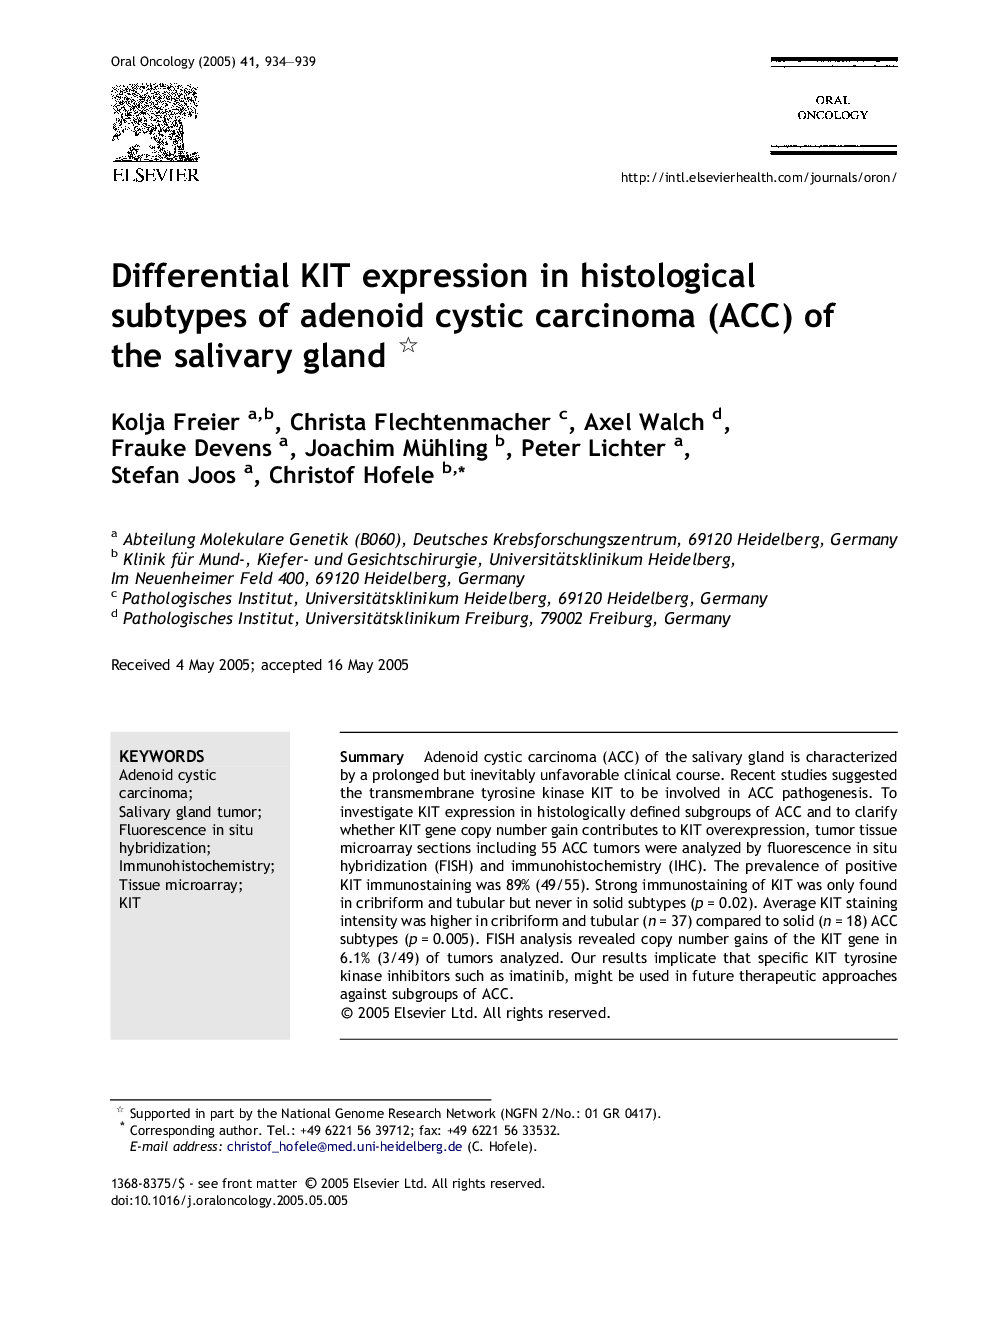 Differential KIT expression in histological subtypes of adenoid cystic carcinoma (ACC) of the salivary gland